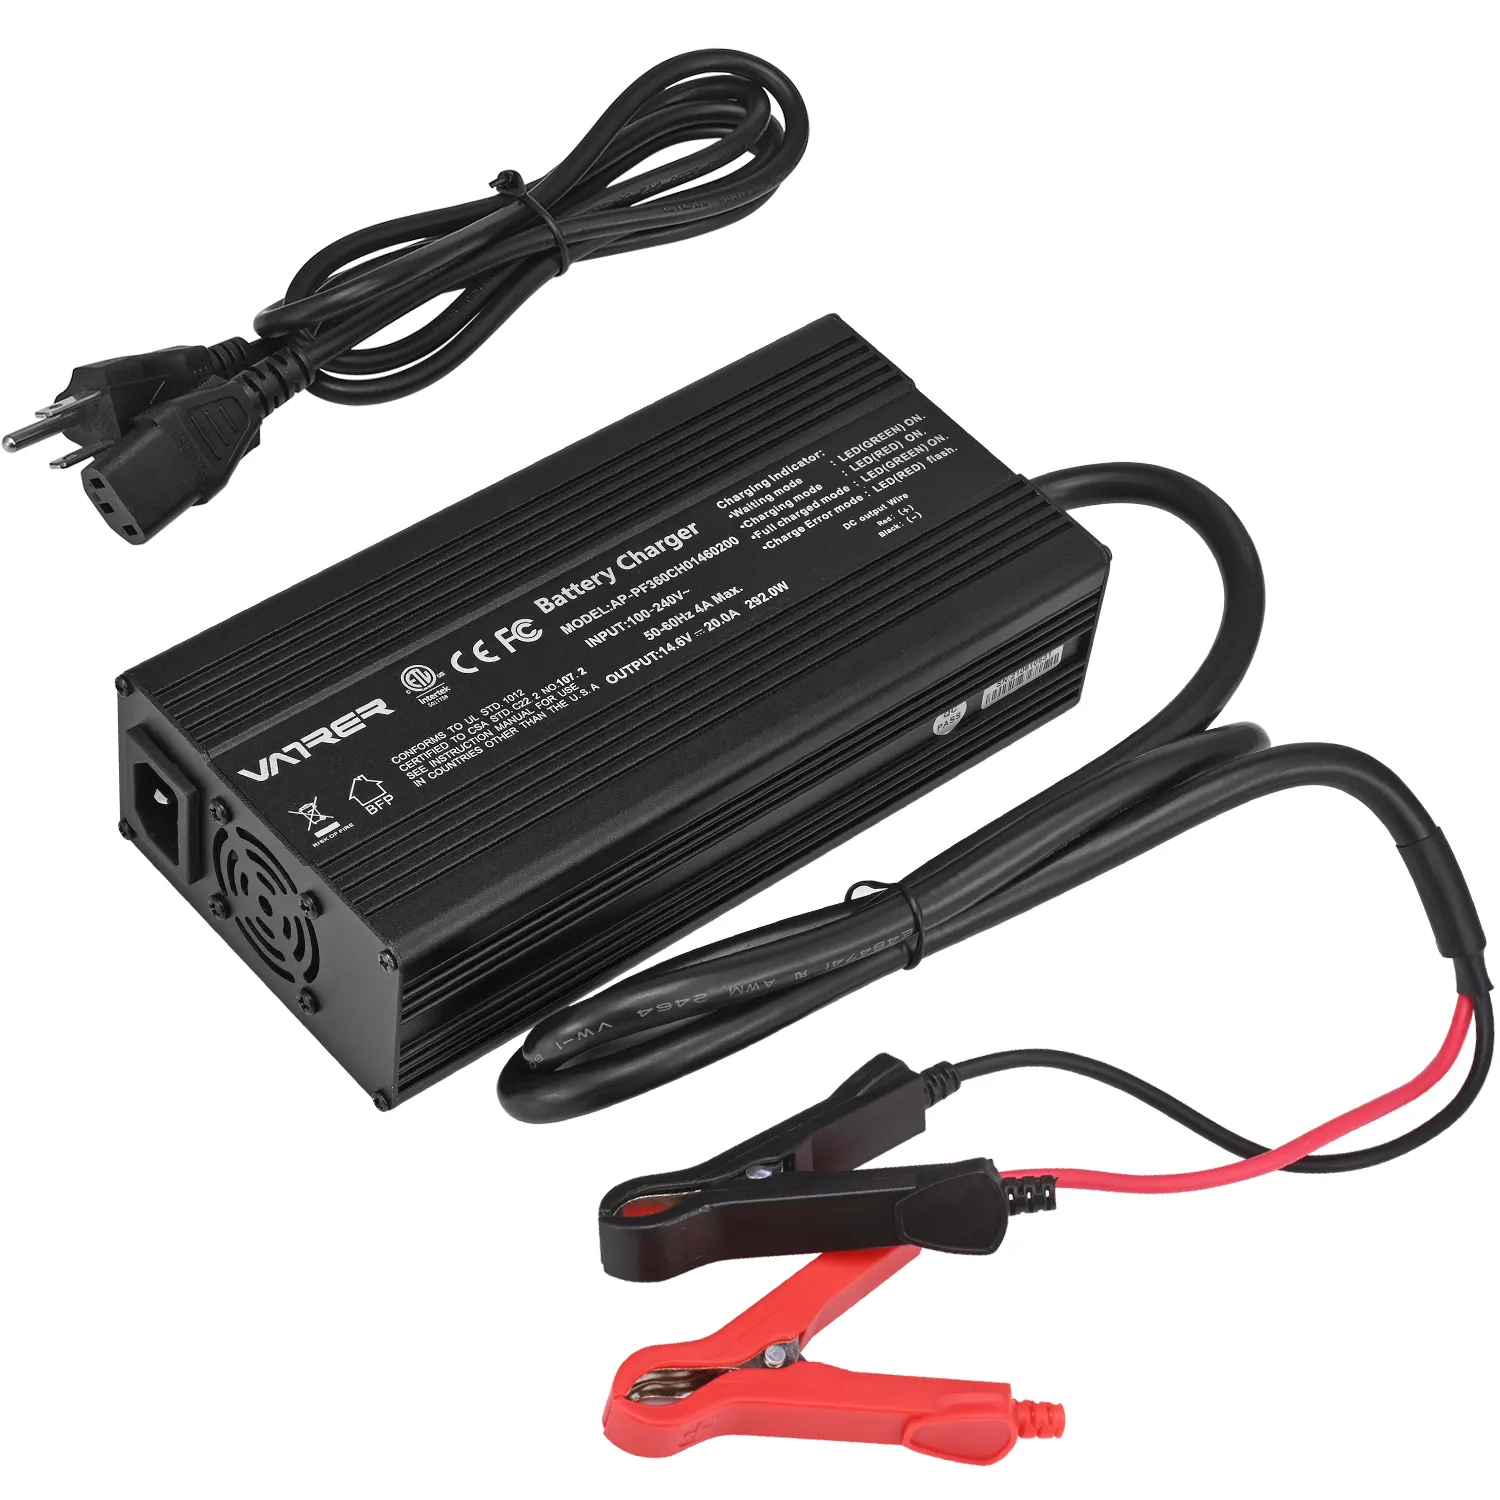 14.6V 20A Intelligent AC-DC Battery Charger LiFePO4 Battery Charger For 12V Lifepo4 Battery Recharging